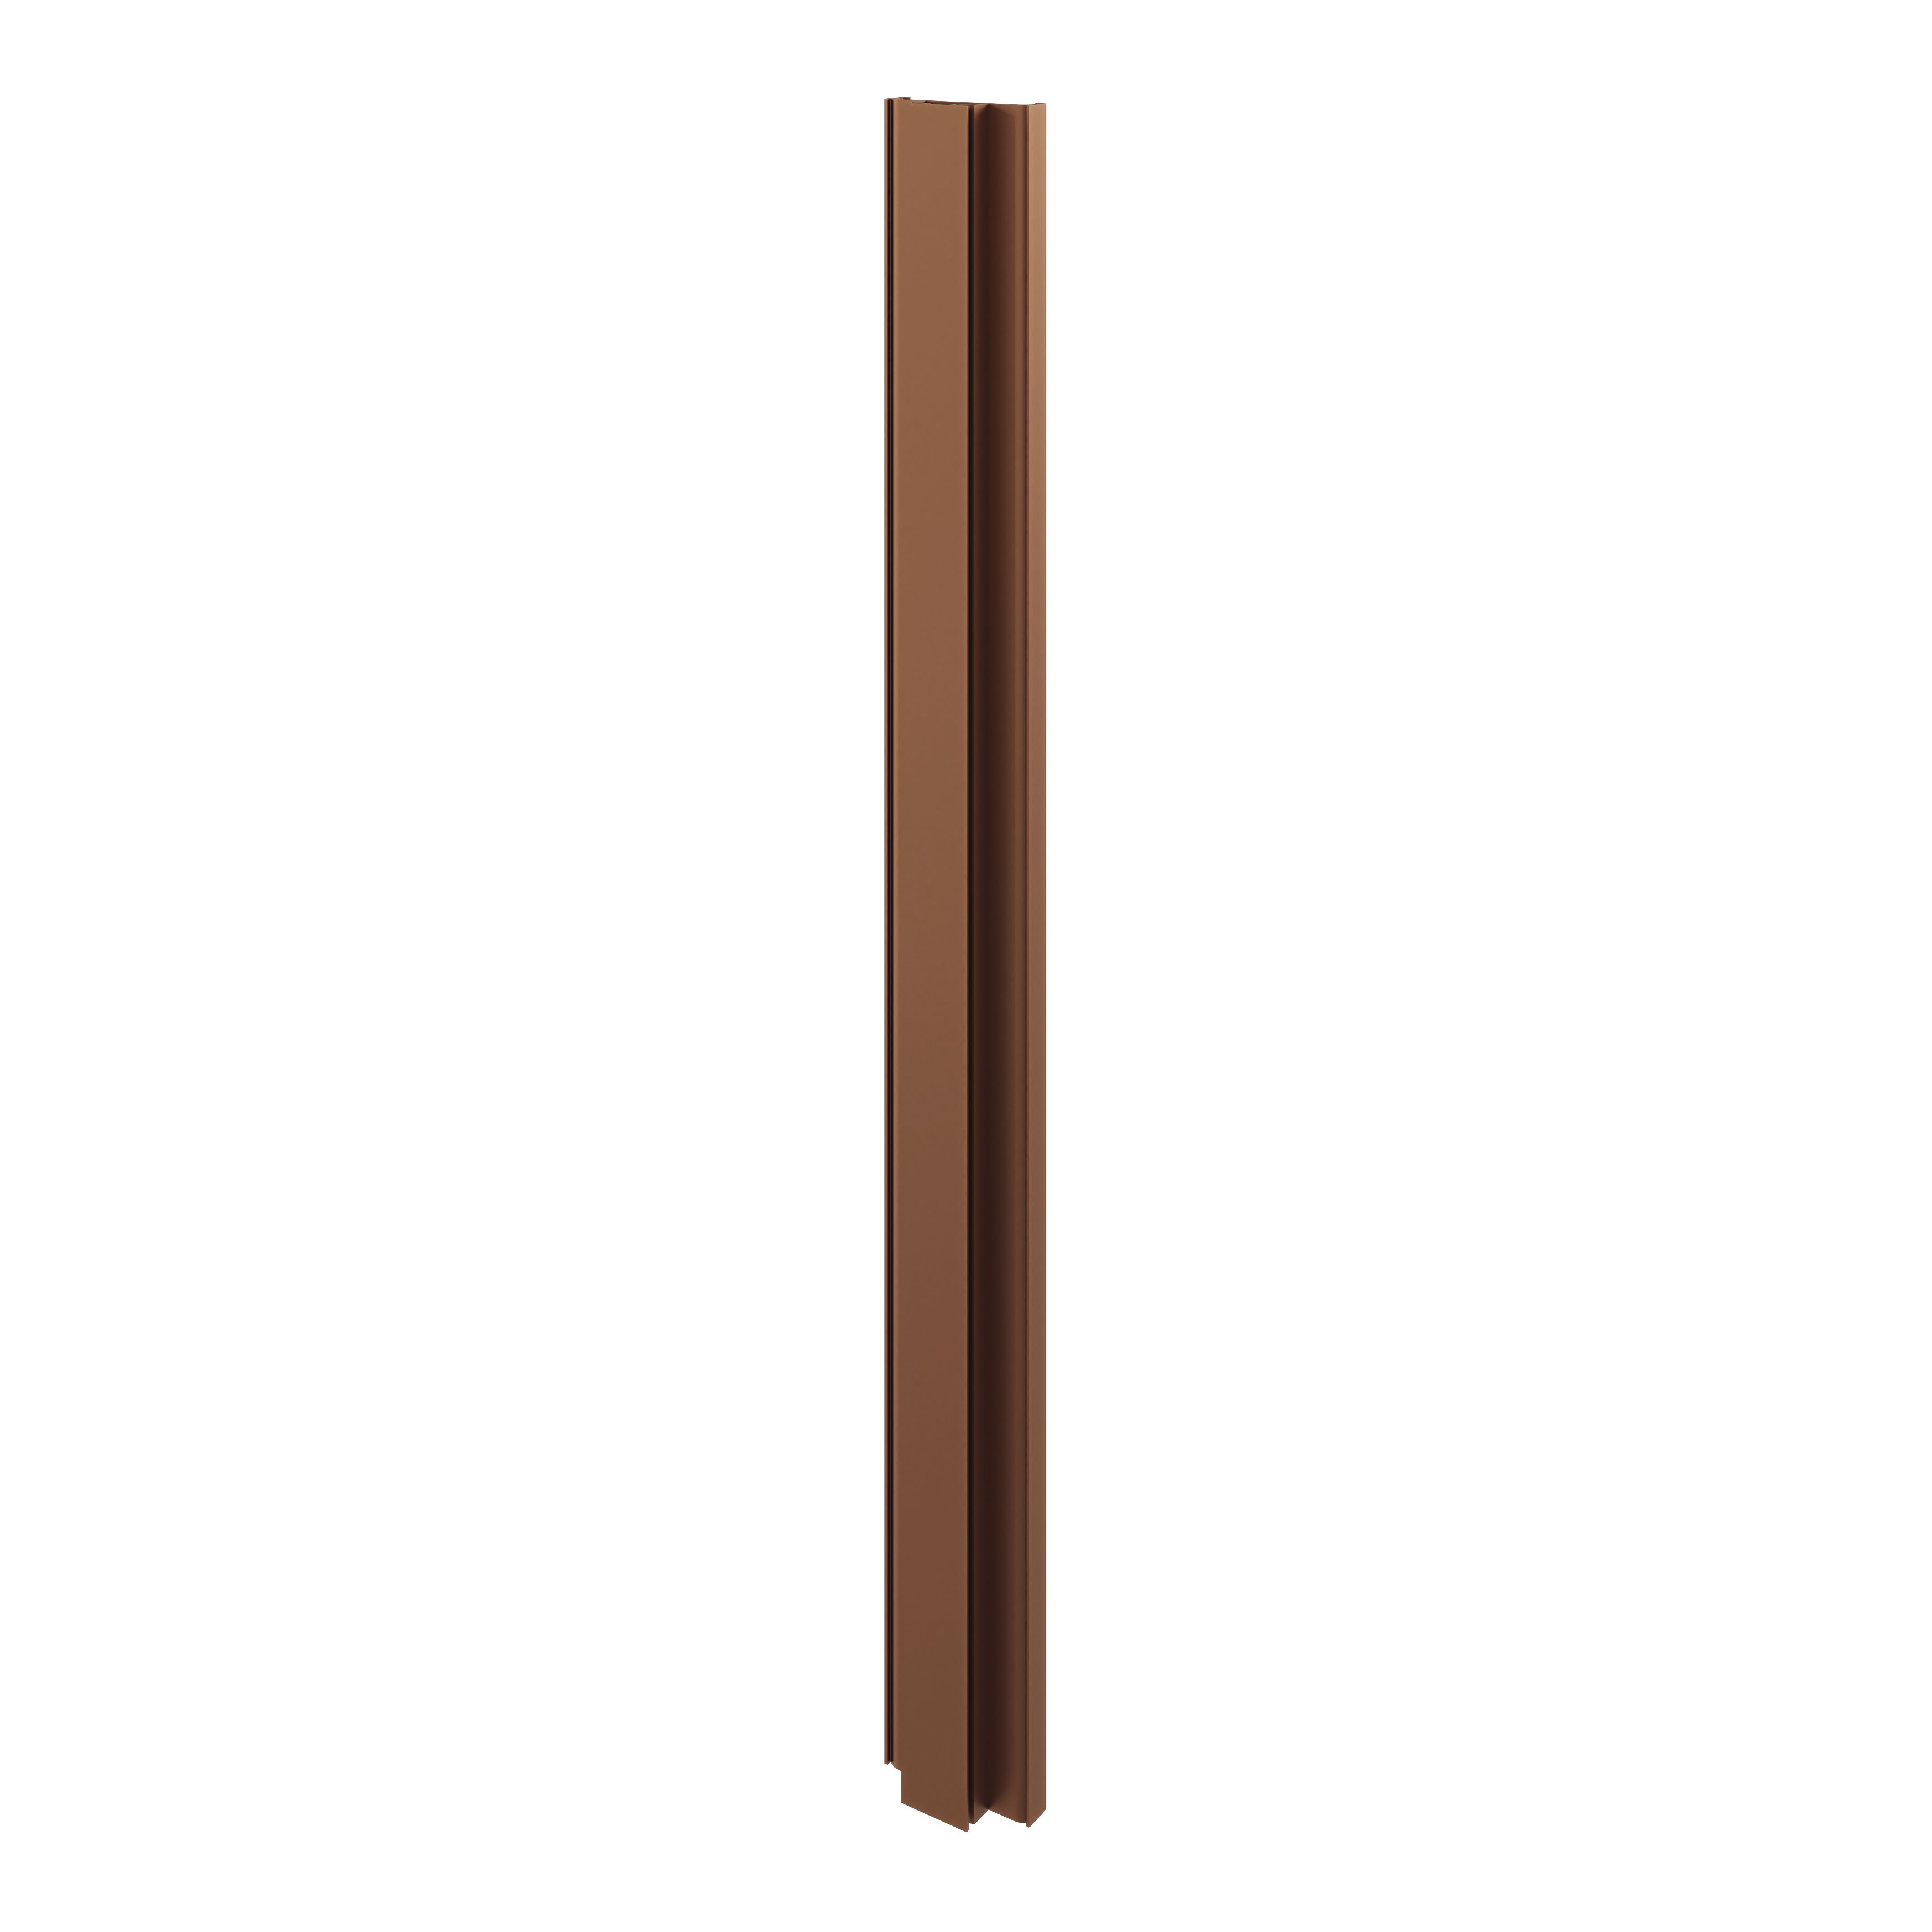 GoodHome Caraway Innovo Satin Copper effect Tall middle larder rail